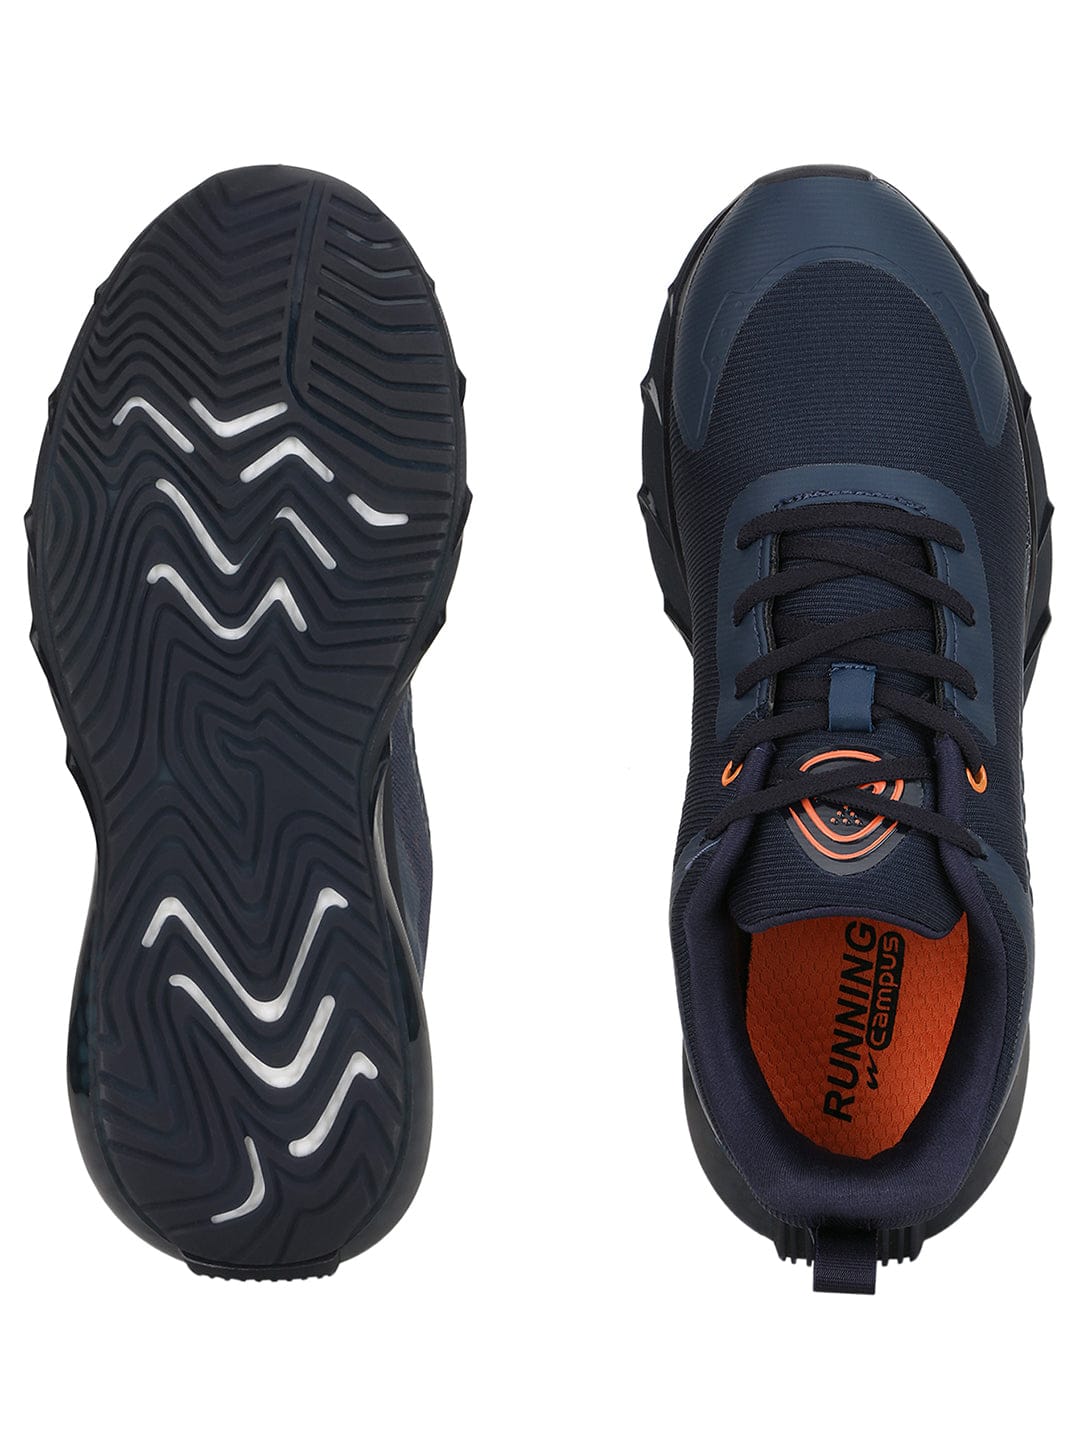 Buy SYCLONE PRO Blue Men's Running Shoes online | Campus Shoes